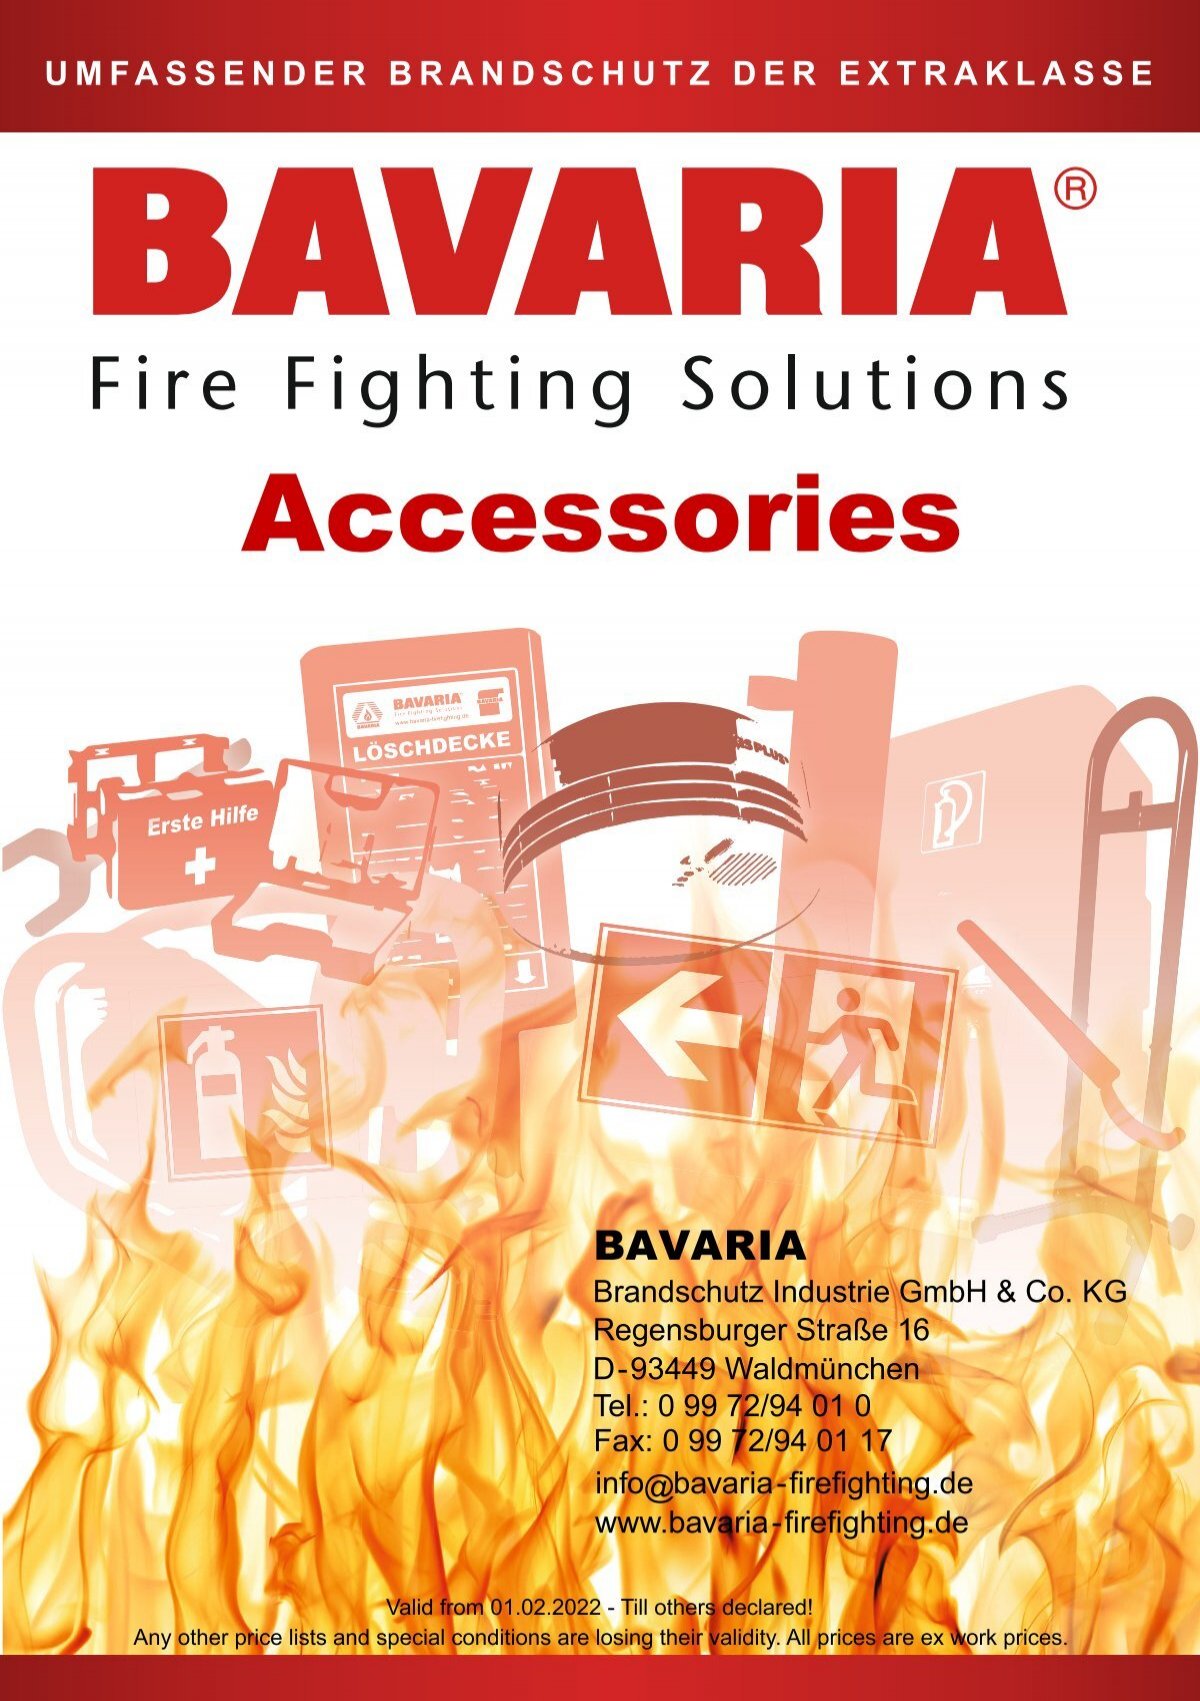 BAVARIA Fire Fighting Solutions acessories